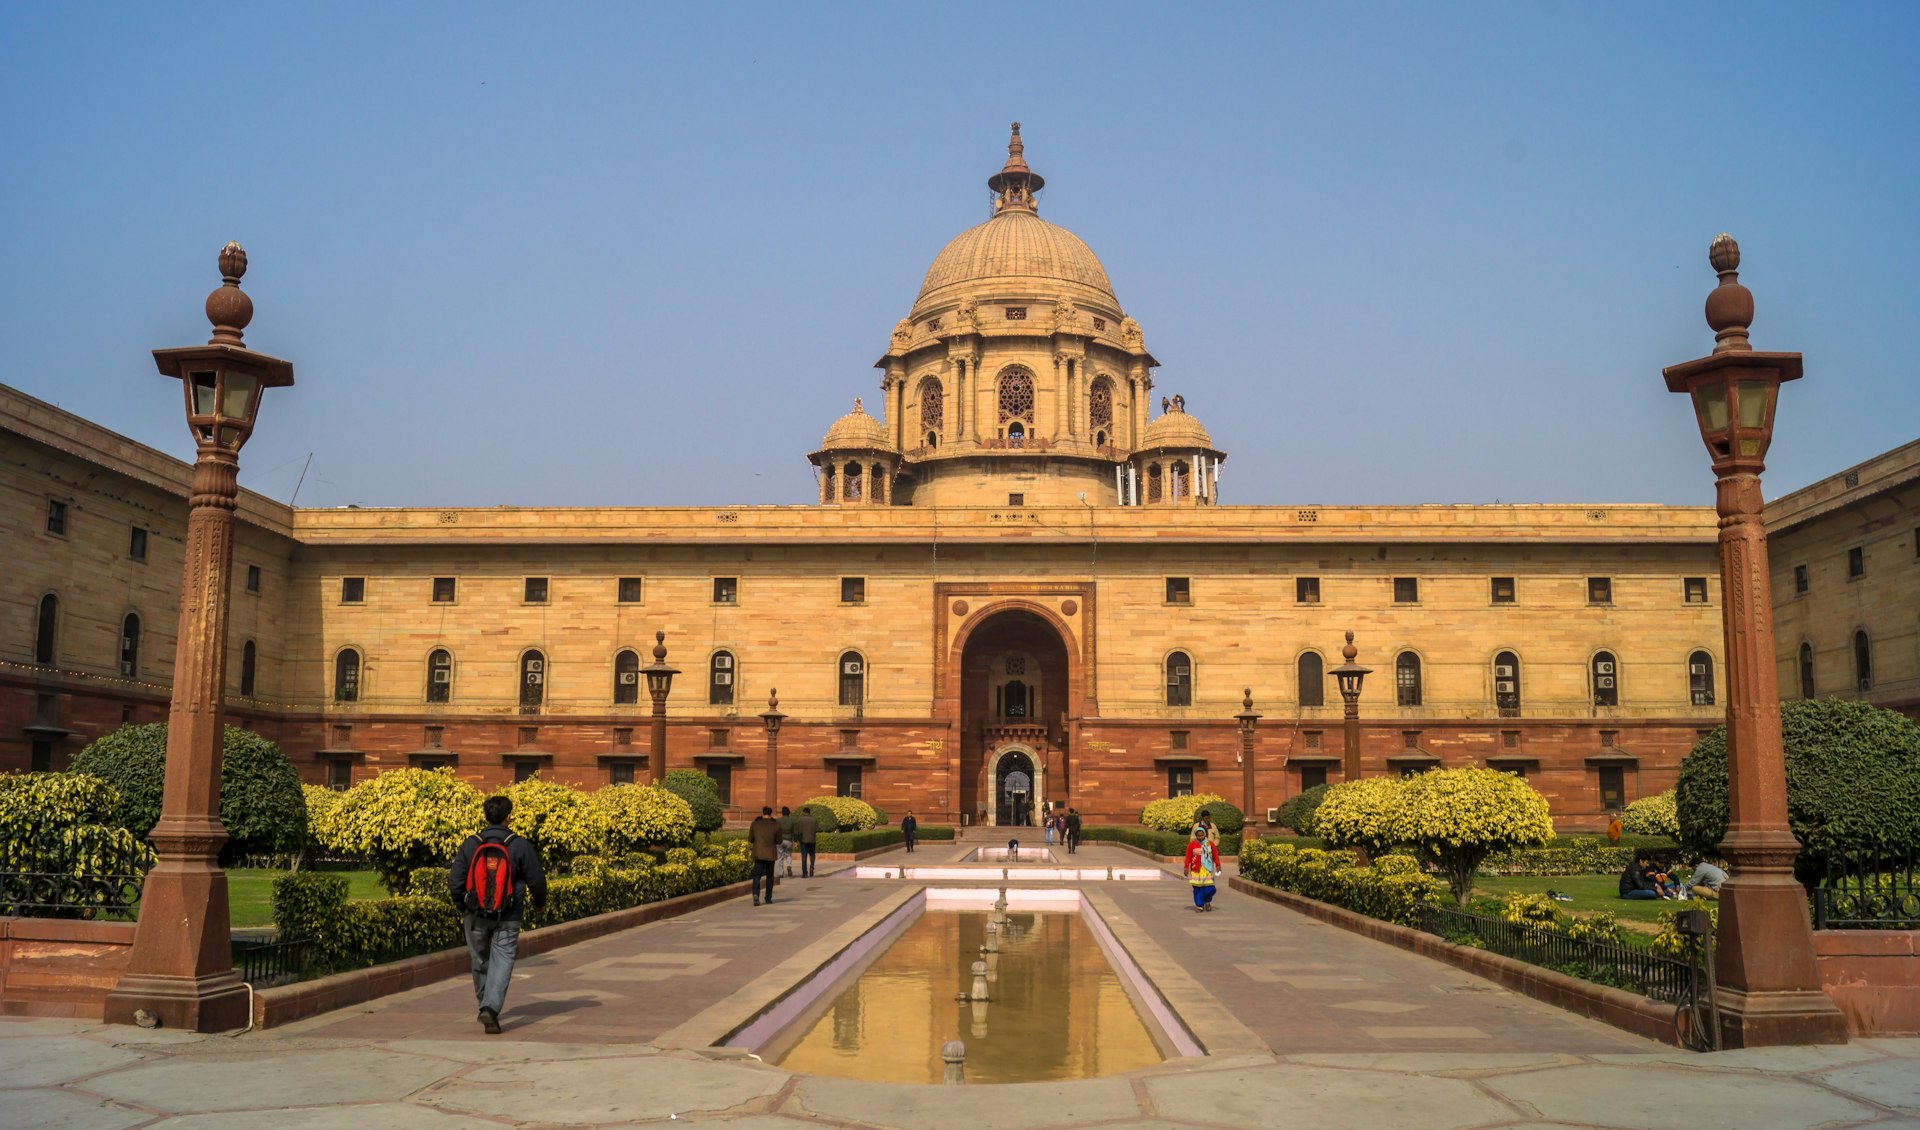 Rashtrapati Bhavan, the official home of the President of India